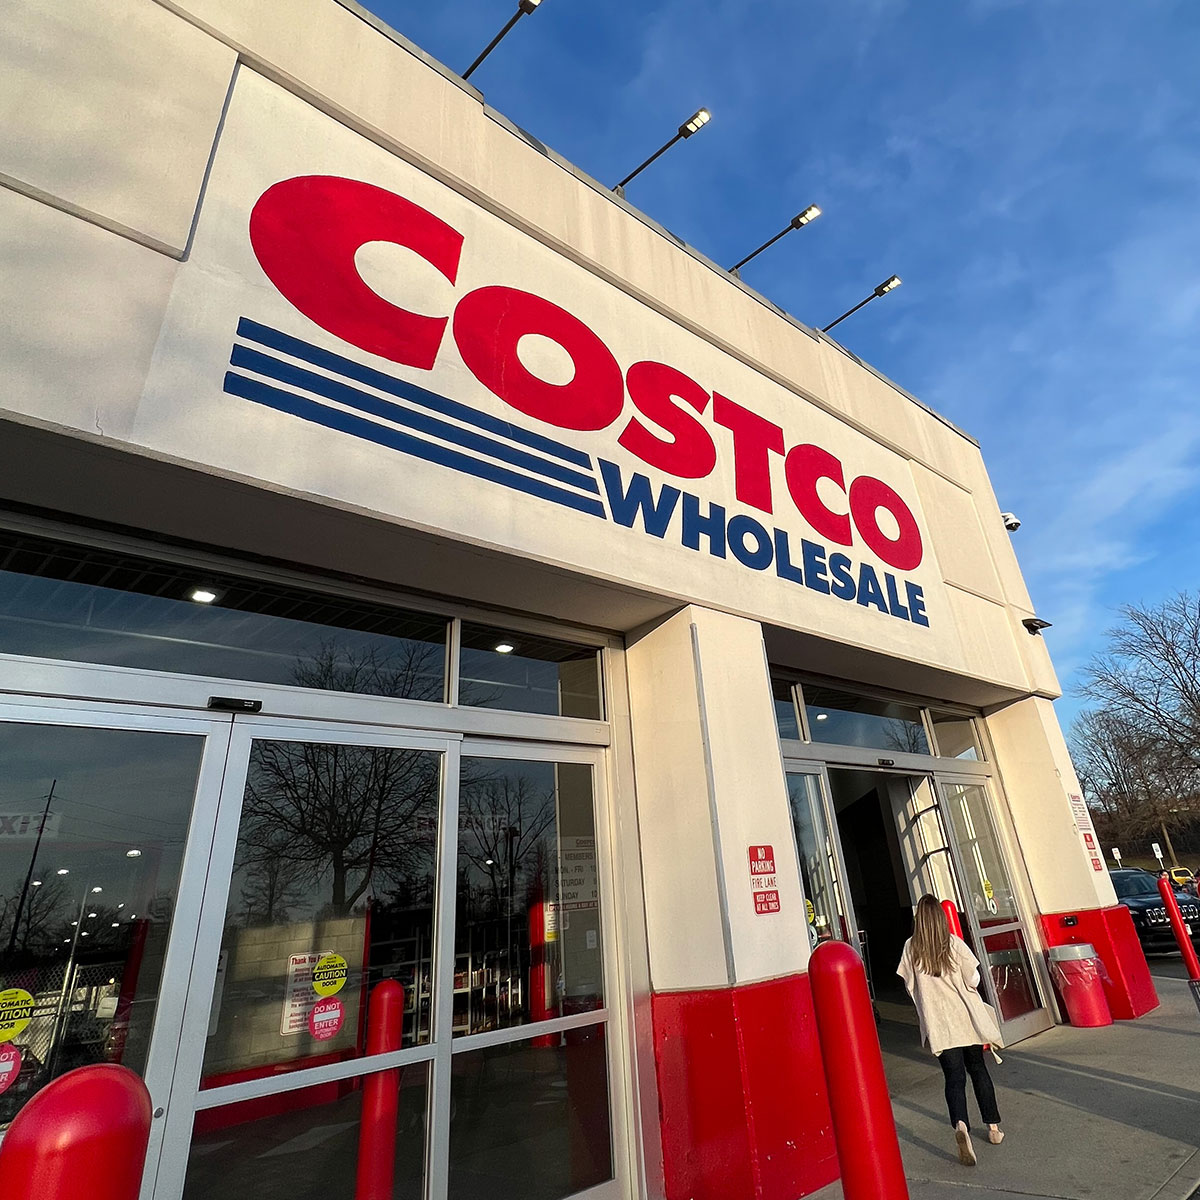 10 Costco Items That Have The Highest Ratings And Reviews: 'So Good' -  SHEfinds